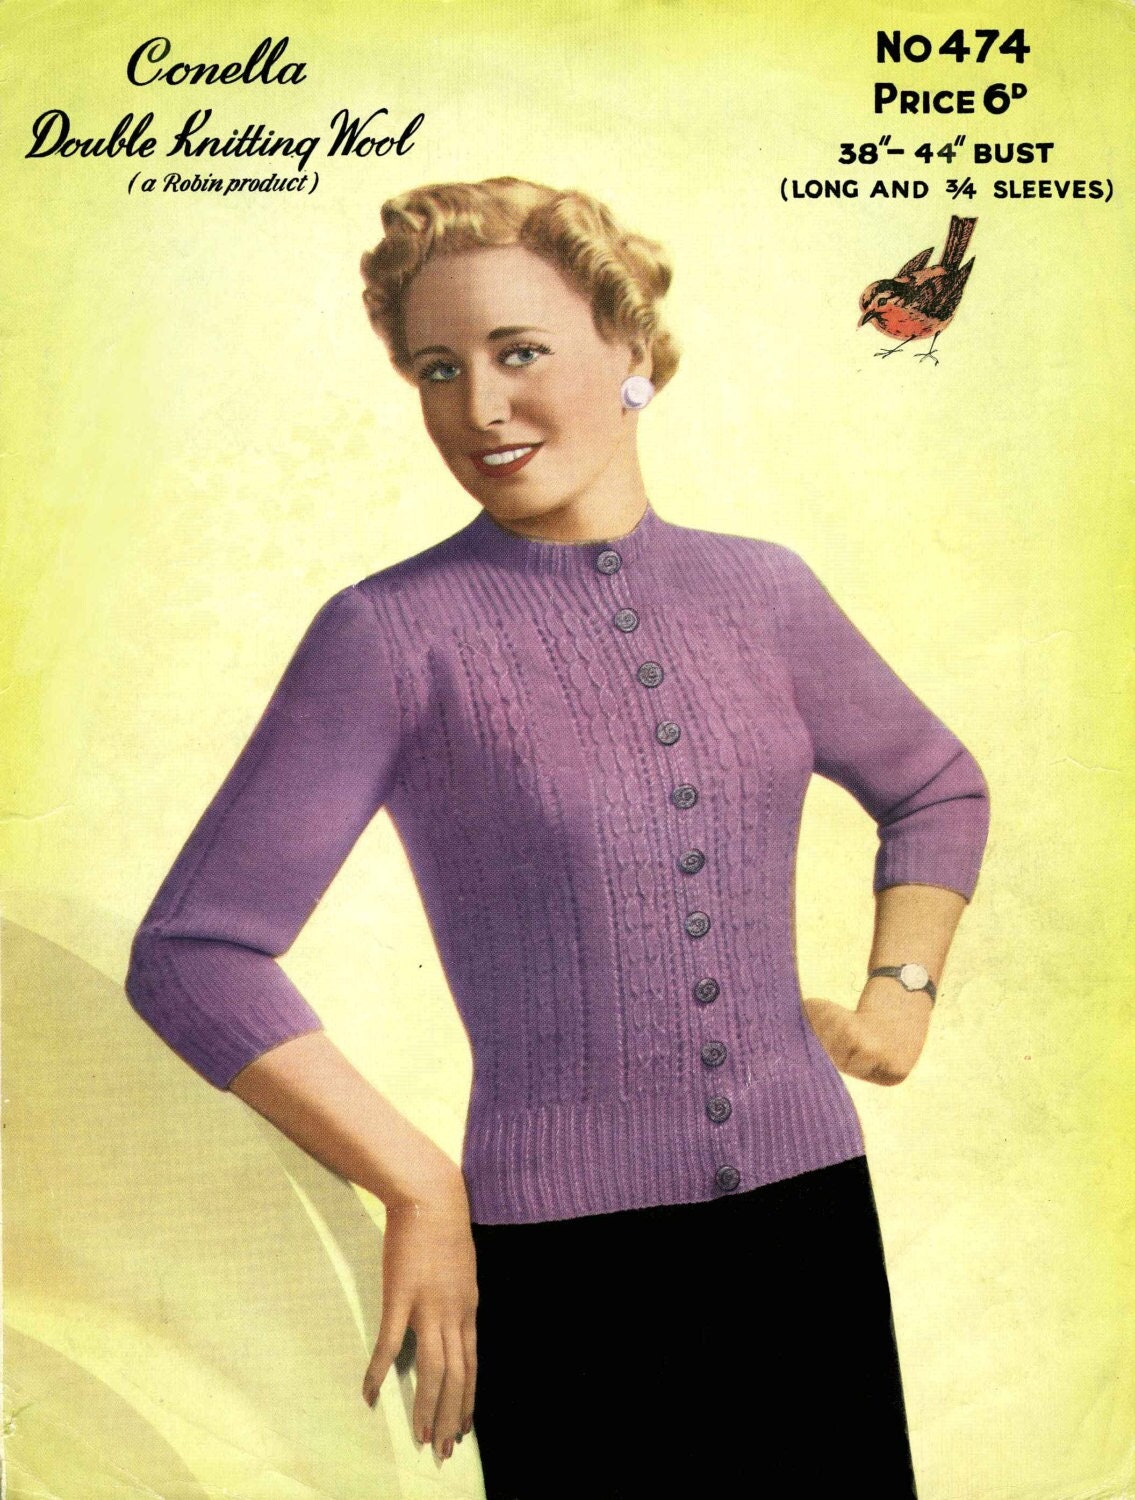 Ladies Cardigan Bust 38"-44" (with three-quarter or long sleeves), DK, 50s Knitting Pattern, Robin 474